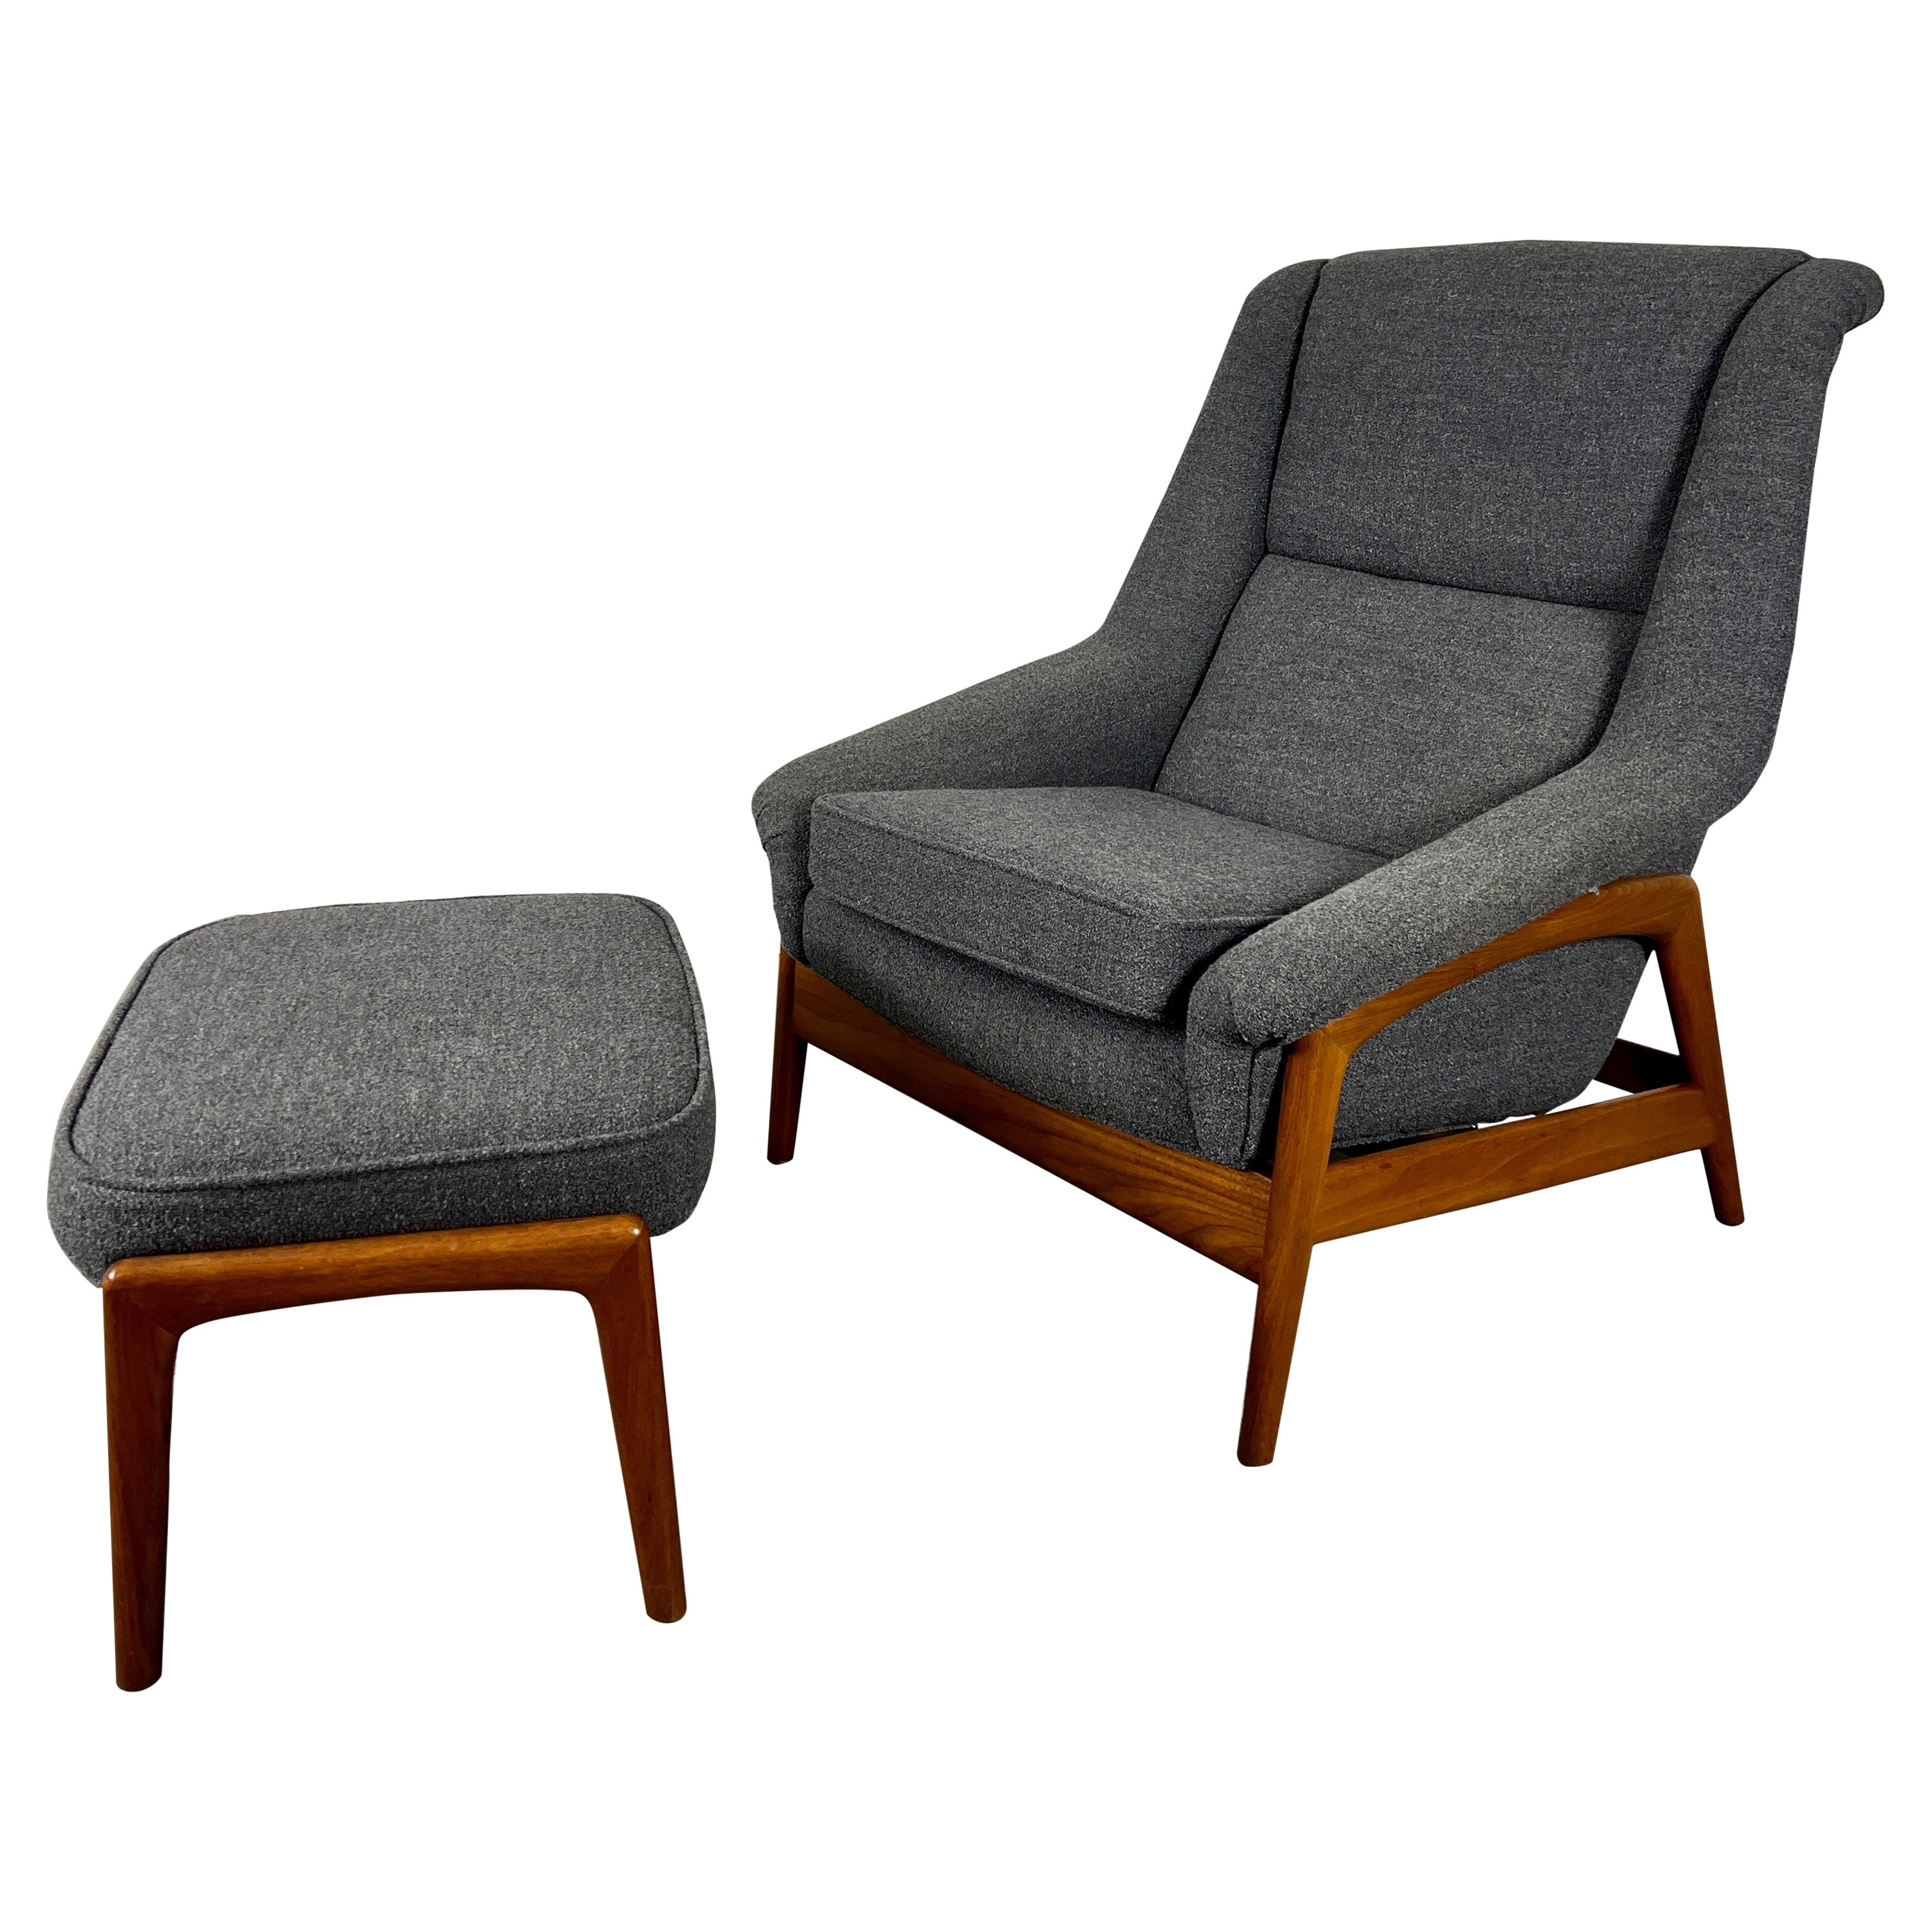 Folke Ohlsson for DUX "Profil" Lounge Chair with Ottoman